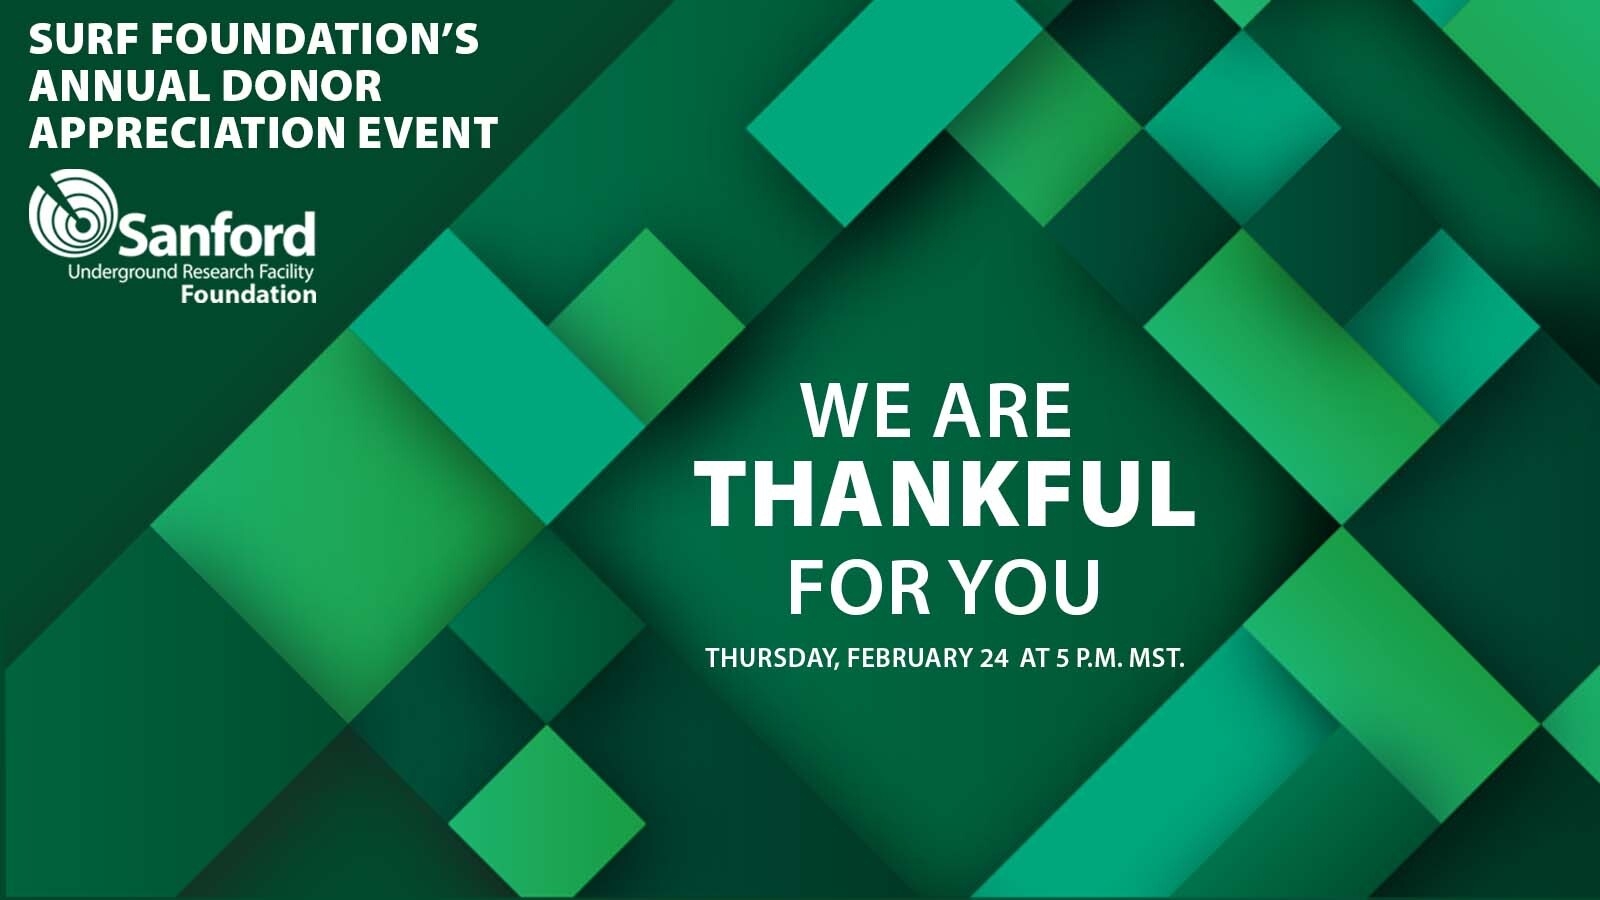 Green abstract shapes with the text "We are thankful for you" in the center